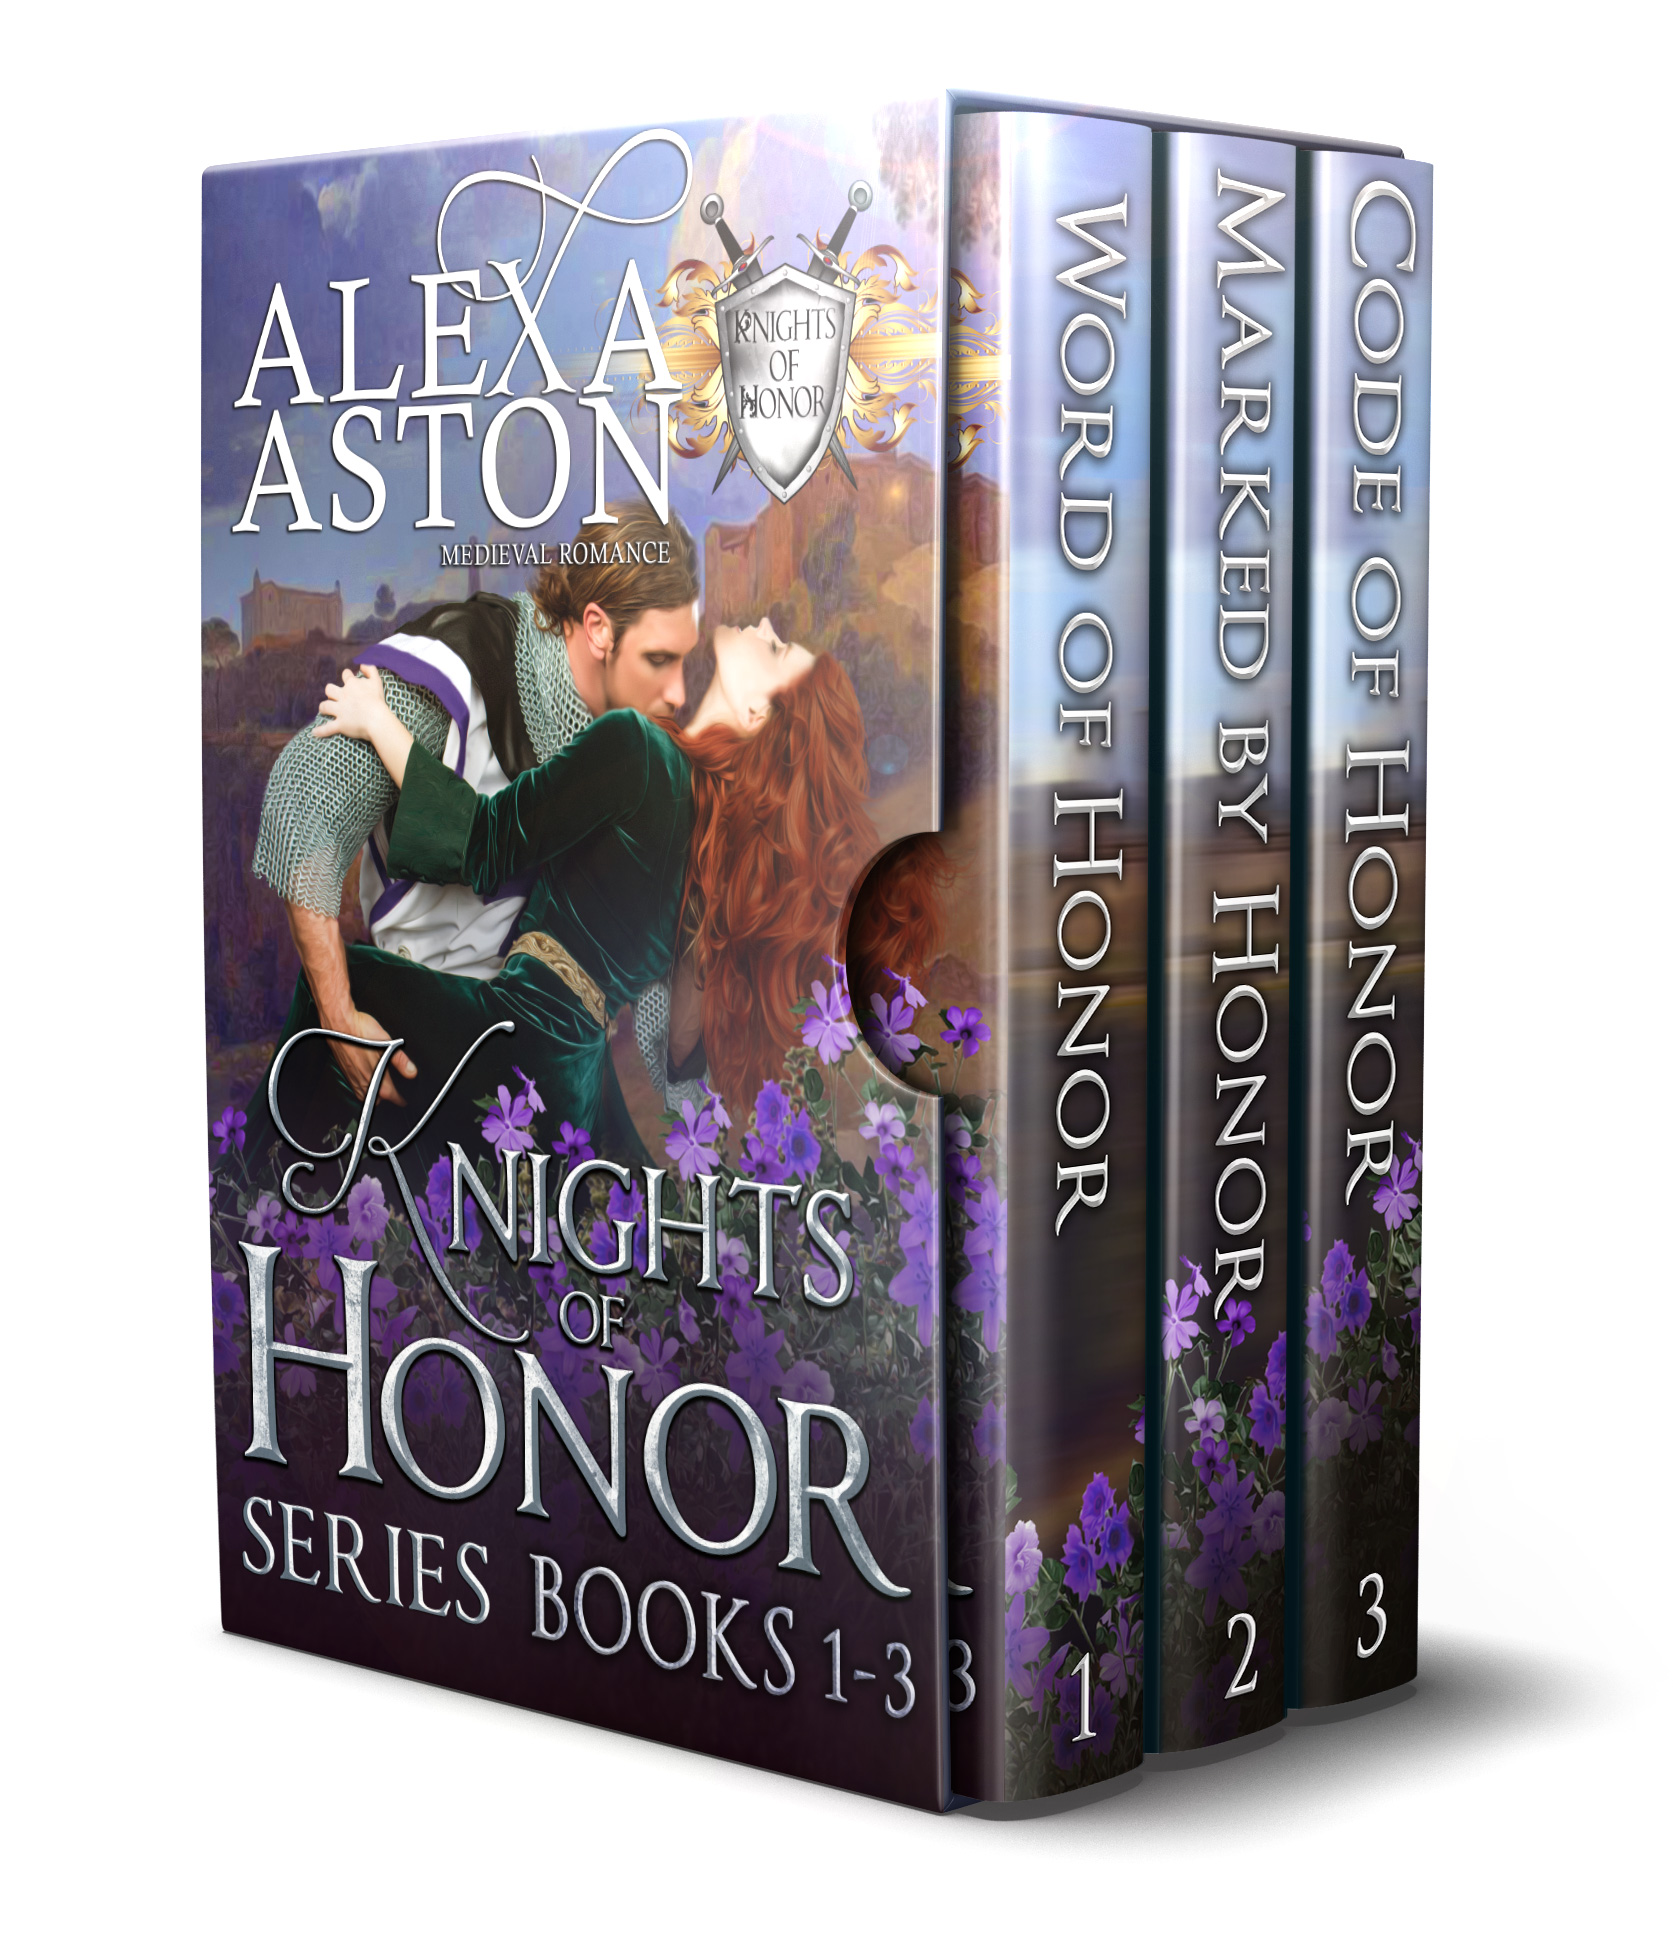 FREE: Knights of Honor Series Boxed Set: Books 1-3 by Alexa Aston